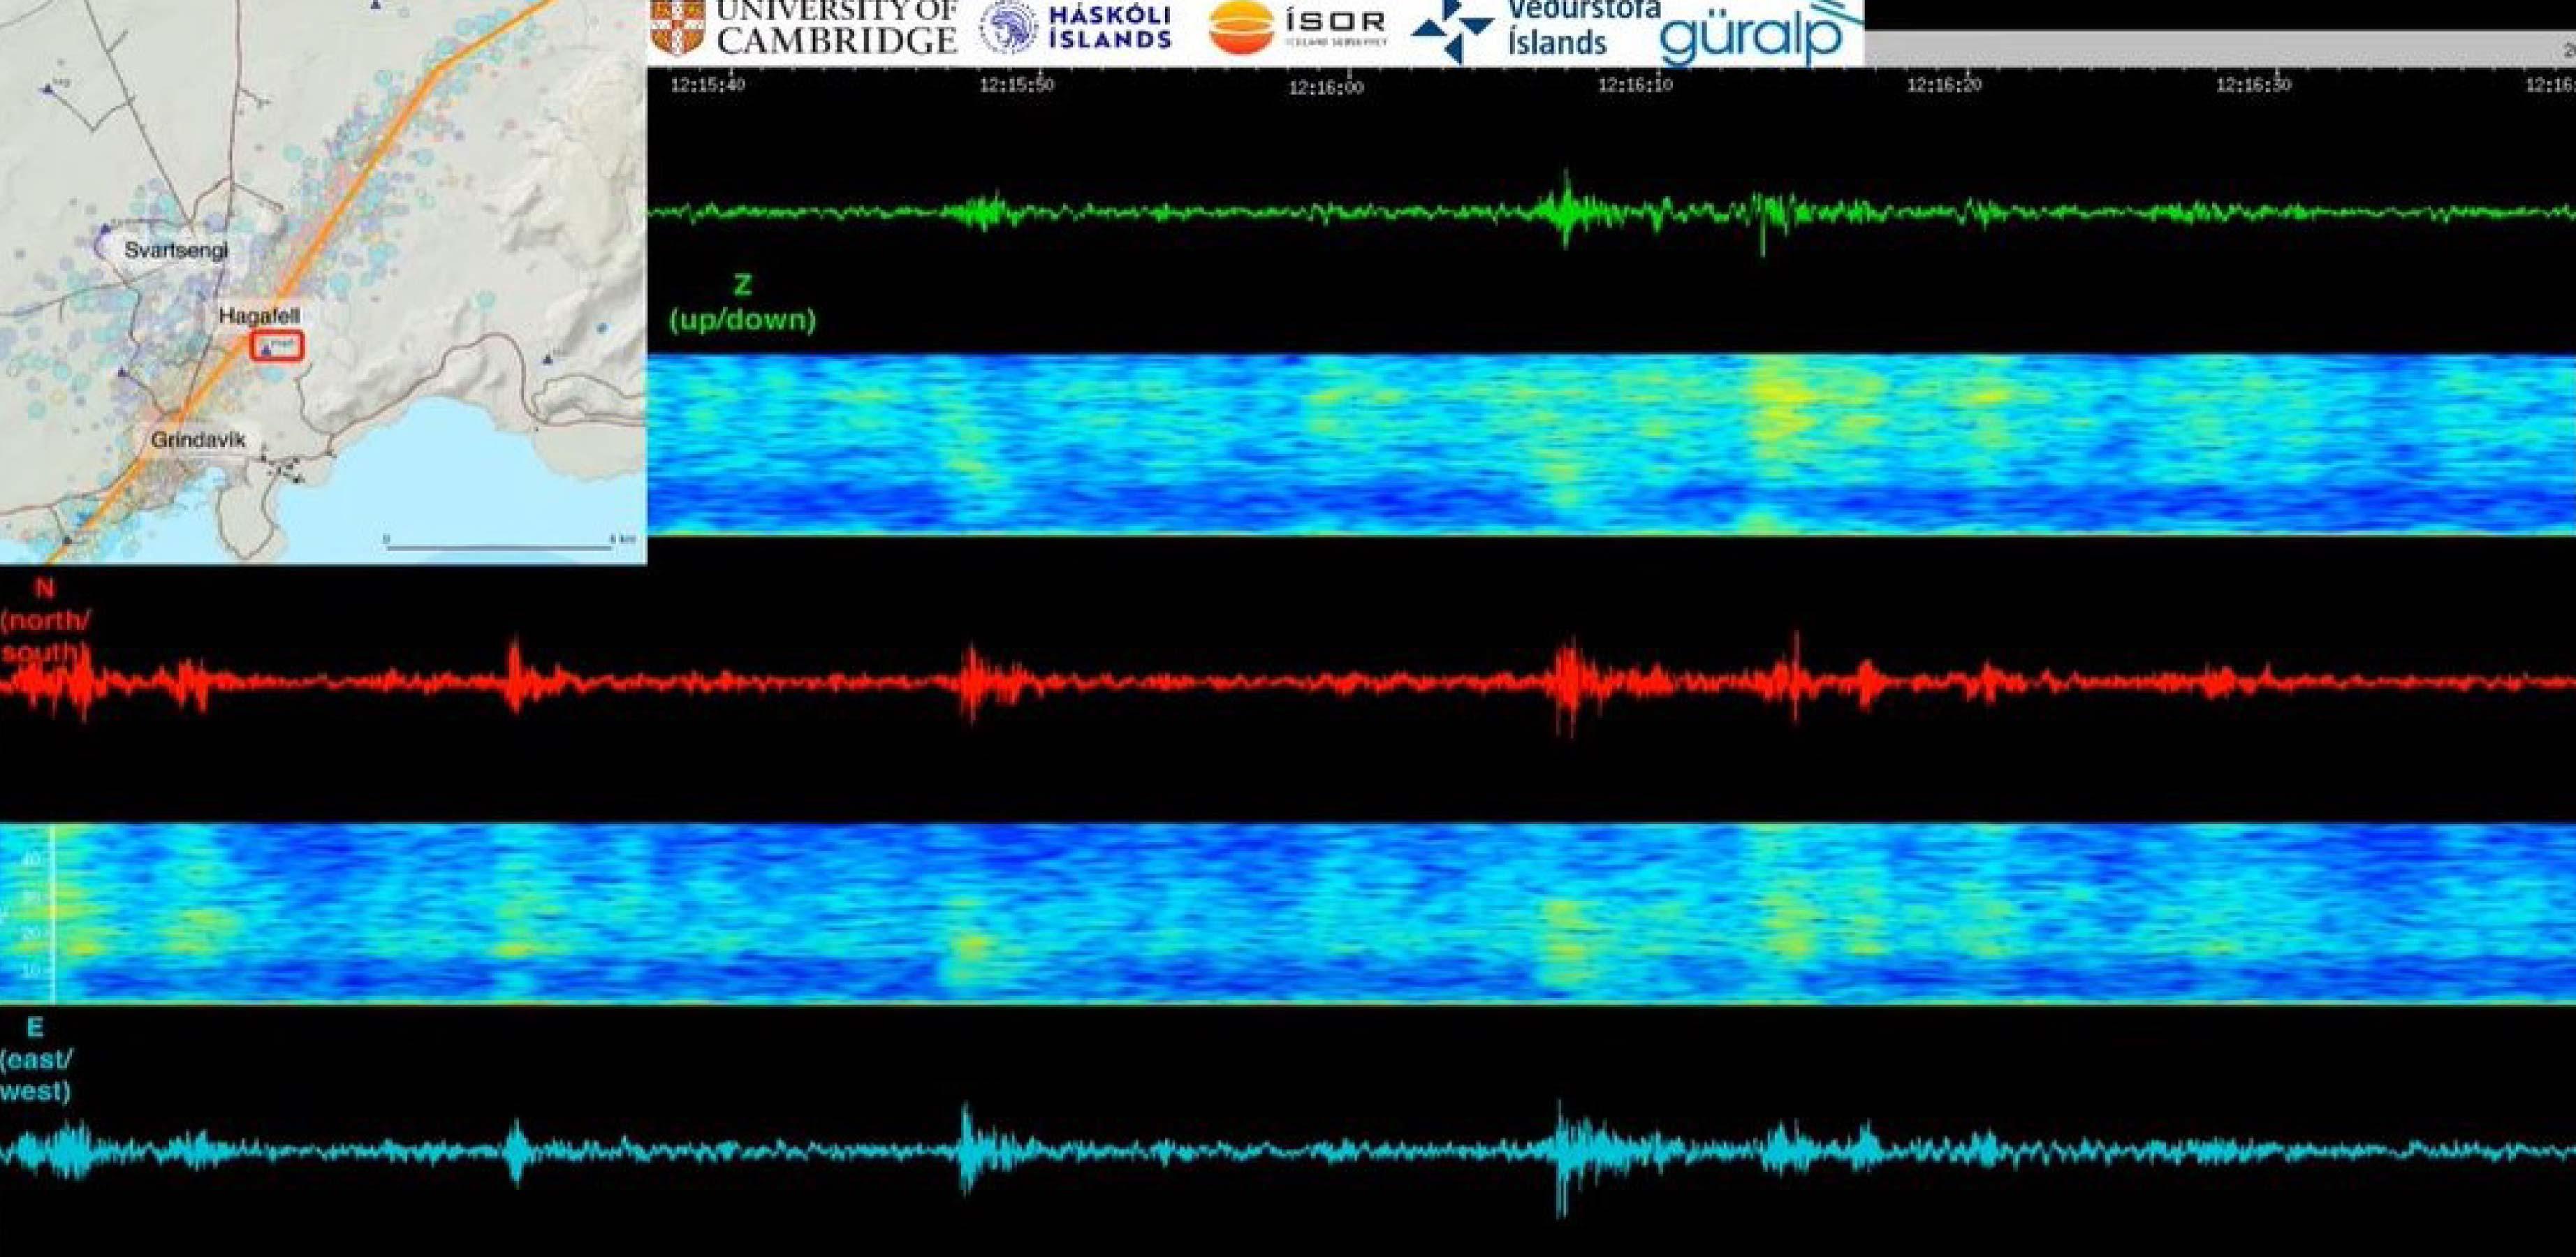 How to Read a Seismogram - Part II